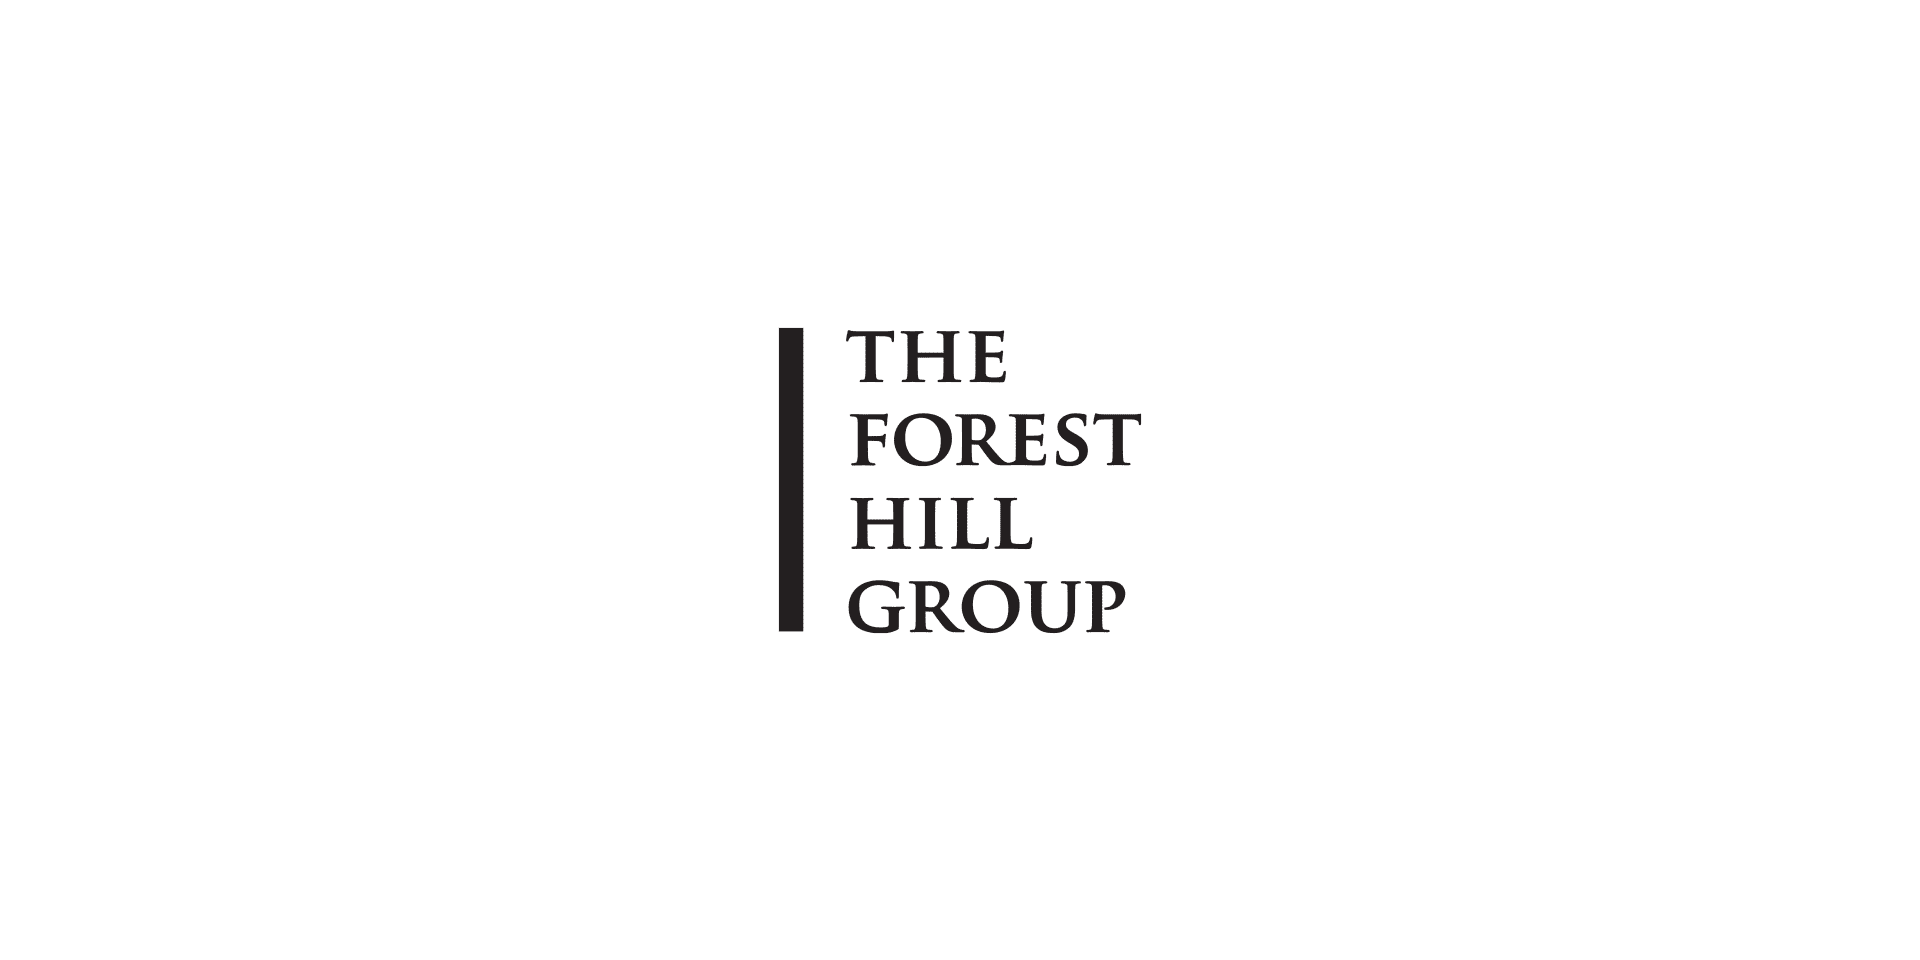 The Forest Hill Group logo